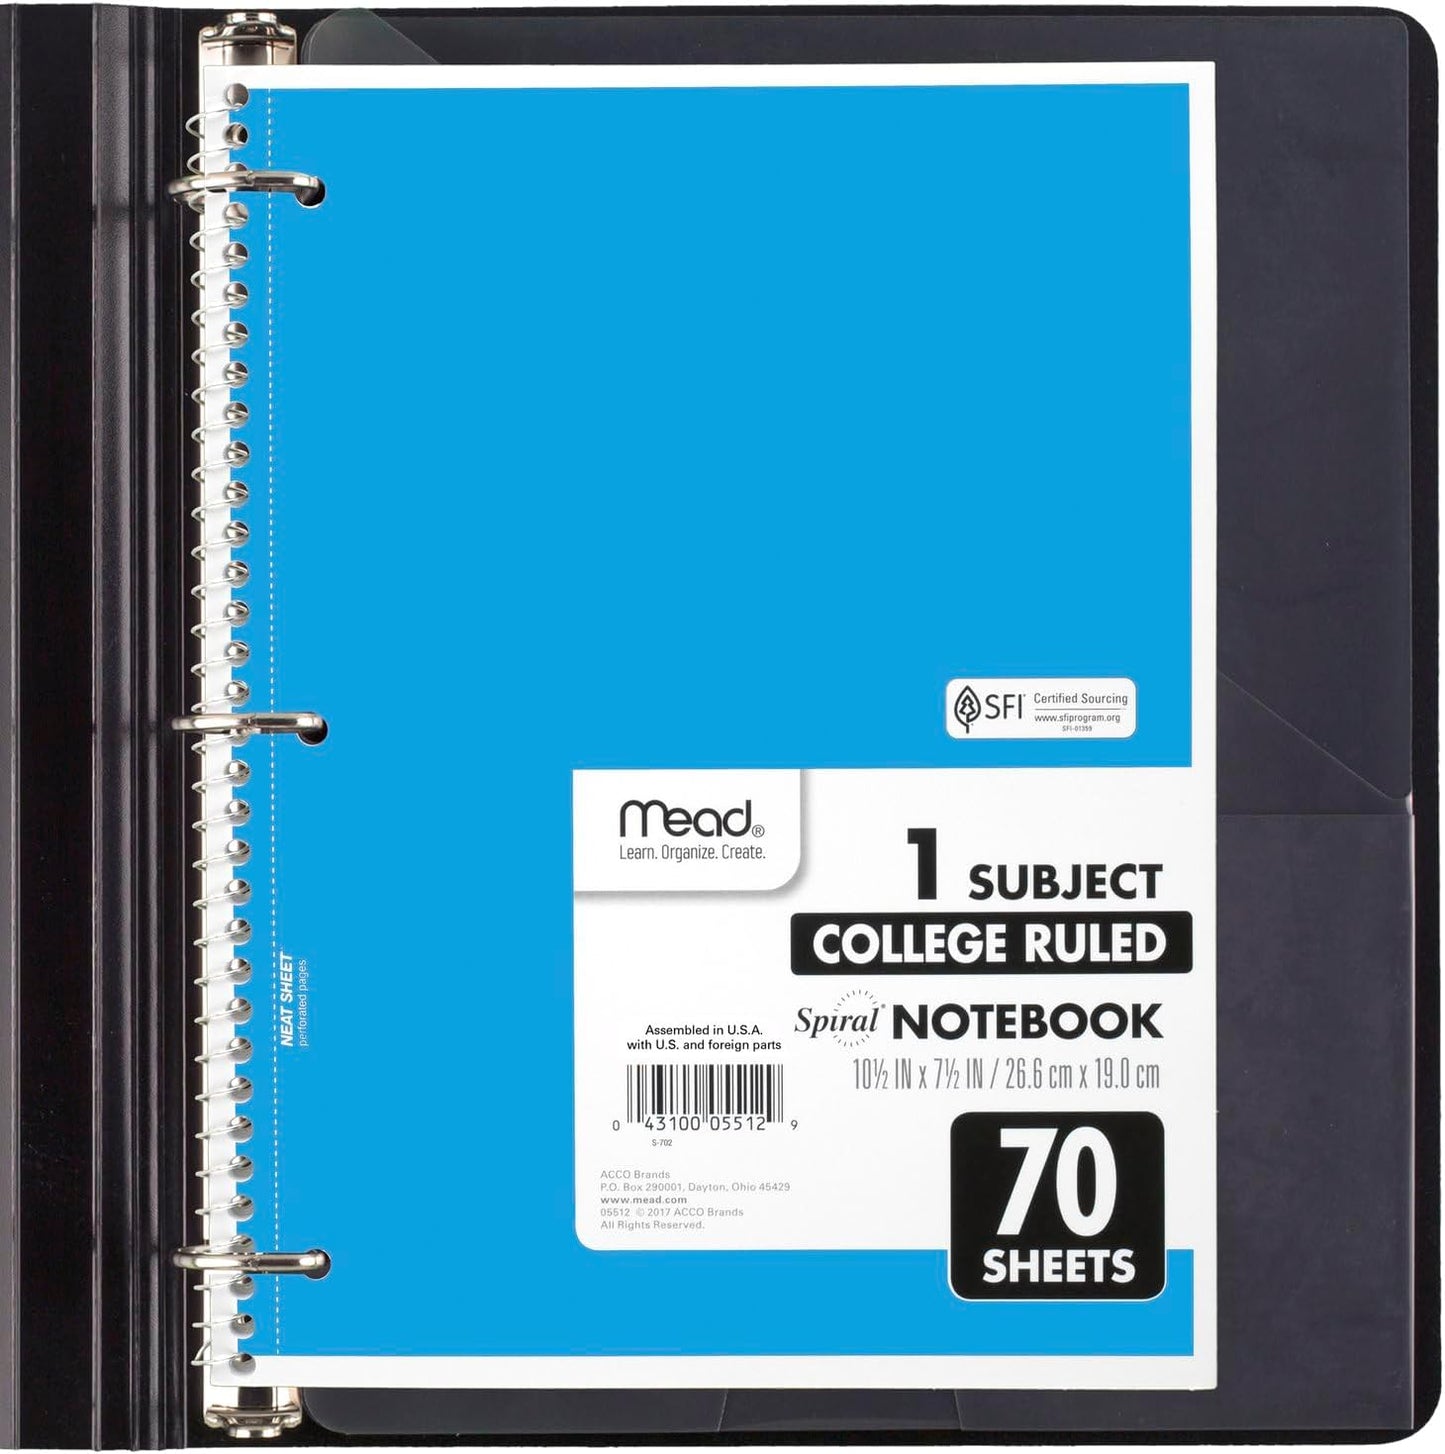 Spiral Notebooks, 6 Pack, 1-Subject, College Ruled Paper, 8" X 10-1/2", 70 Sheets, Assorted Bright Colors (830050-ECM)